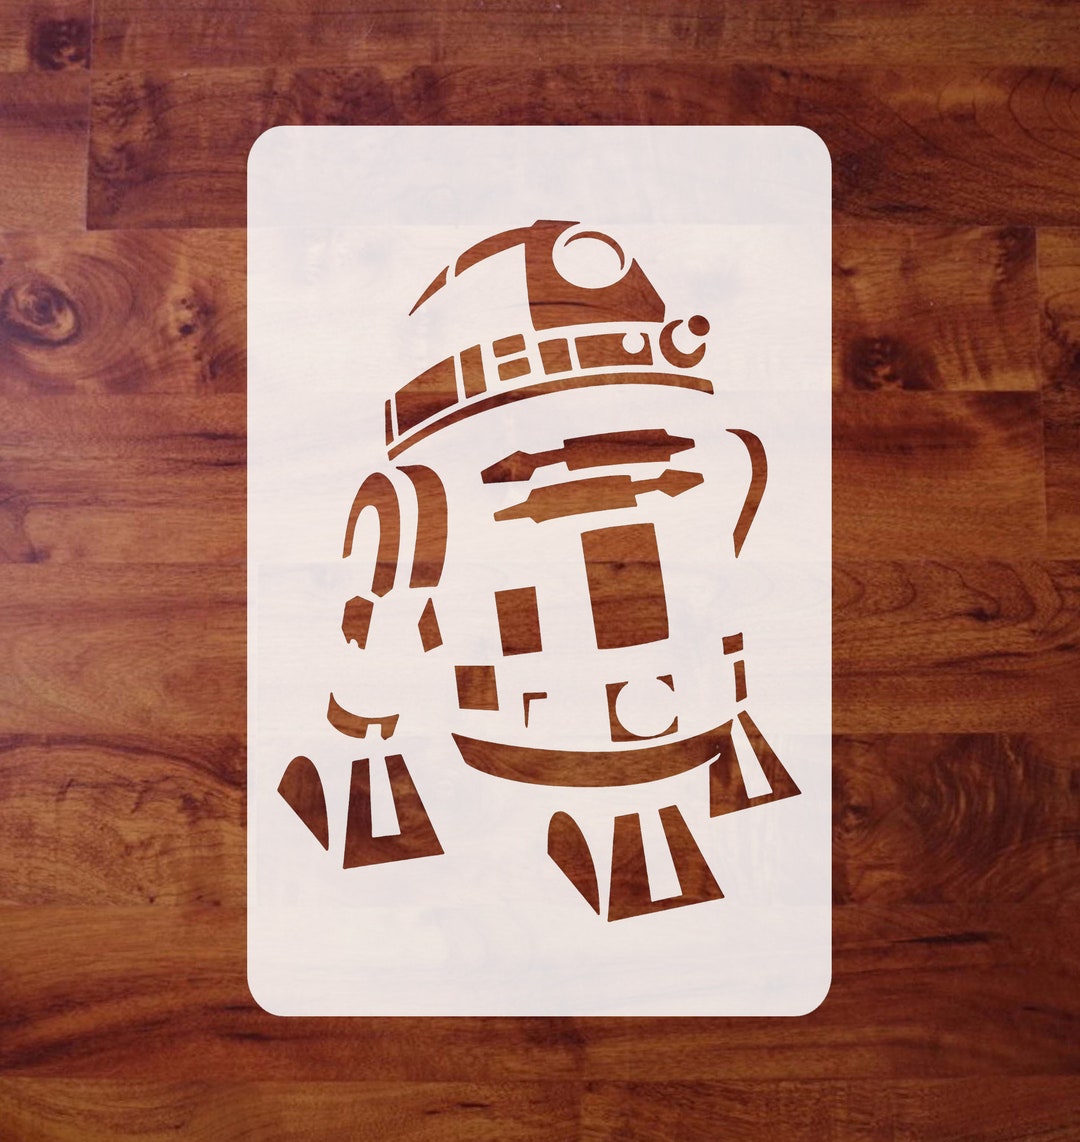 Mylar Star Wars Stencil R2-D2 for Painting Airbrushing